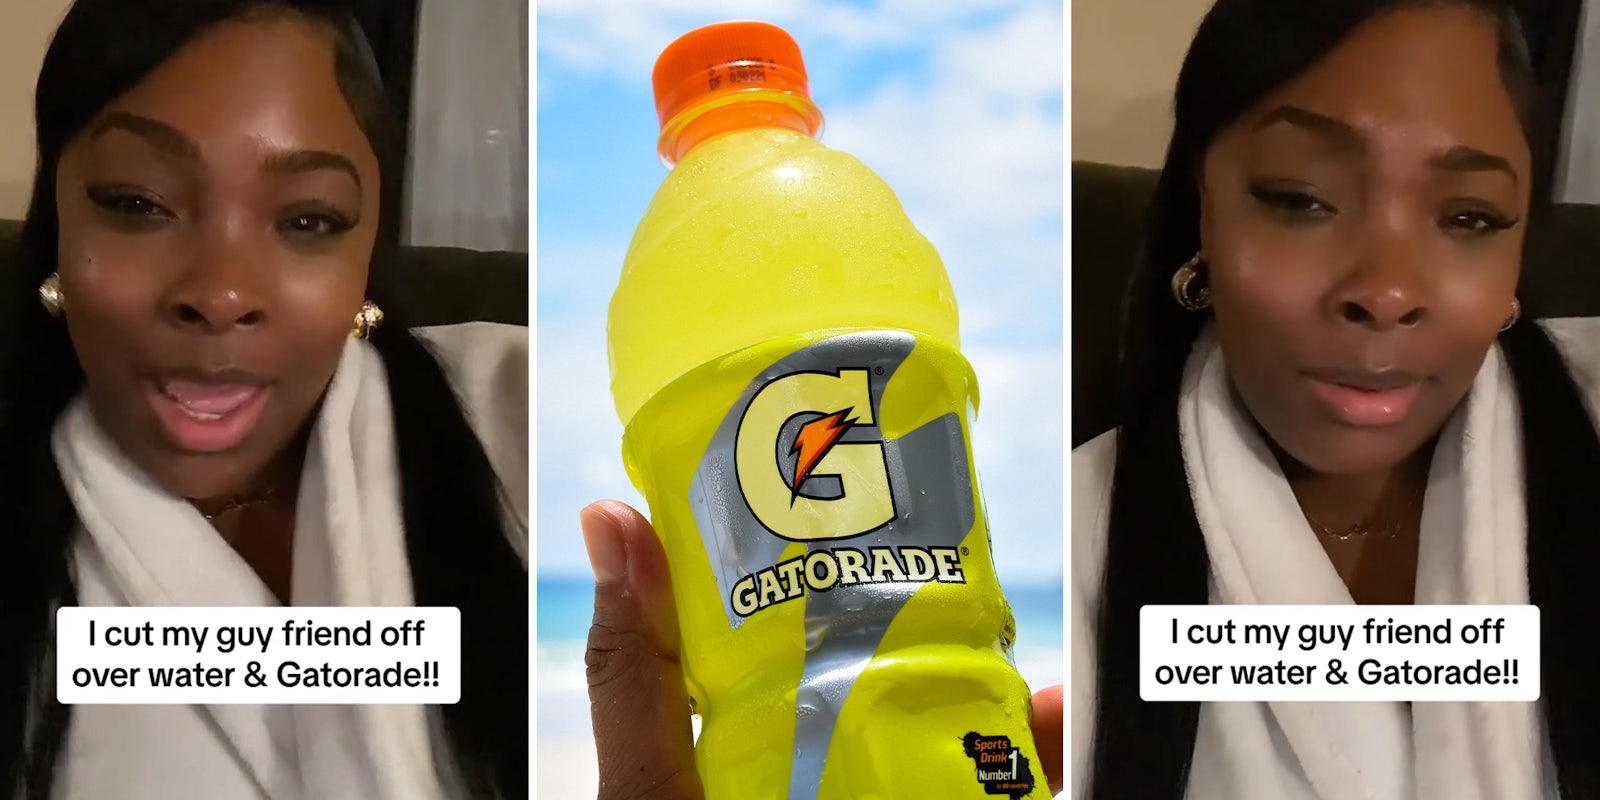 Woman explains why she blocked a friend over water and Gatorade.